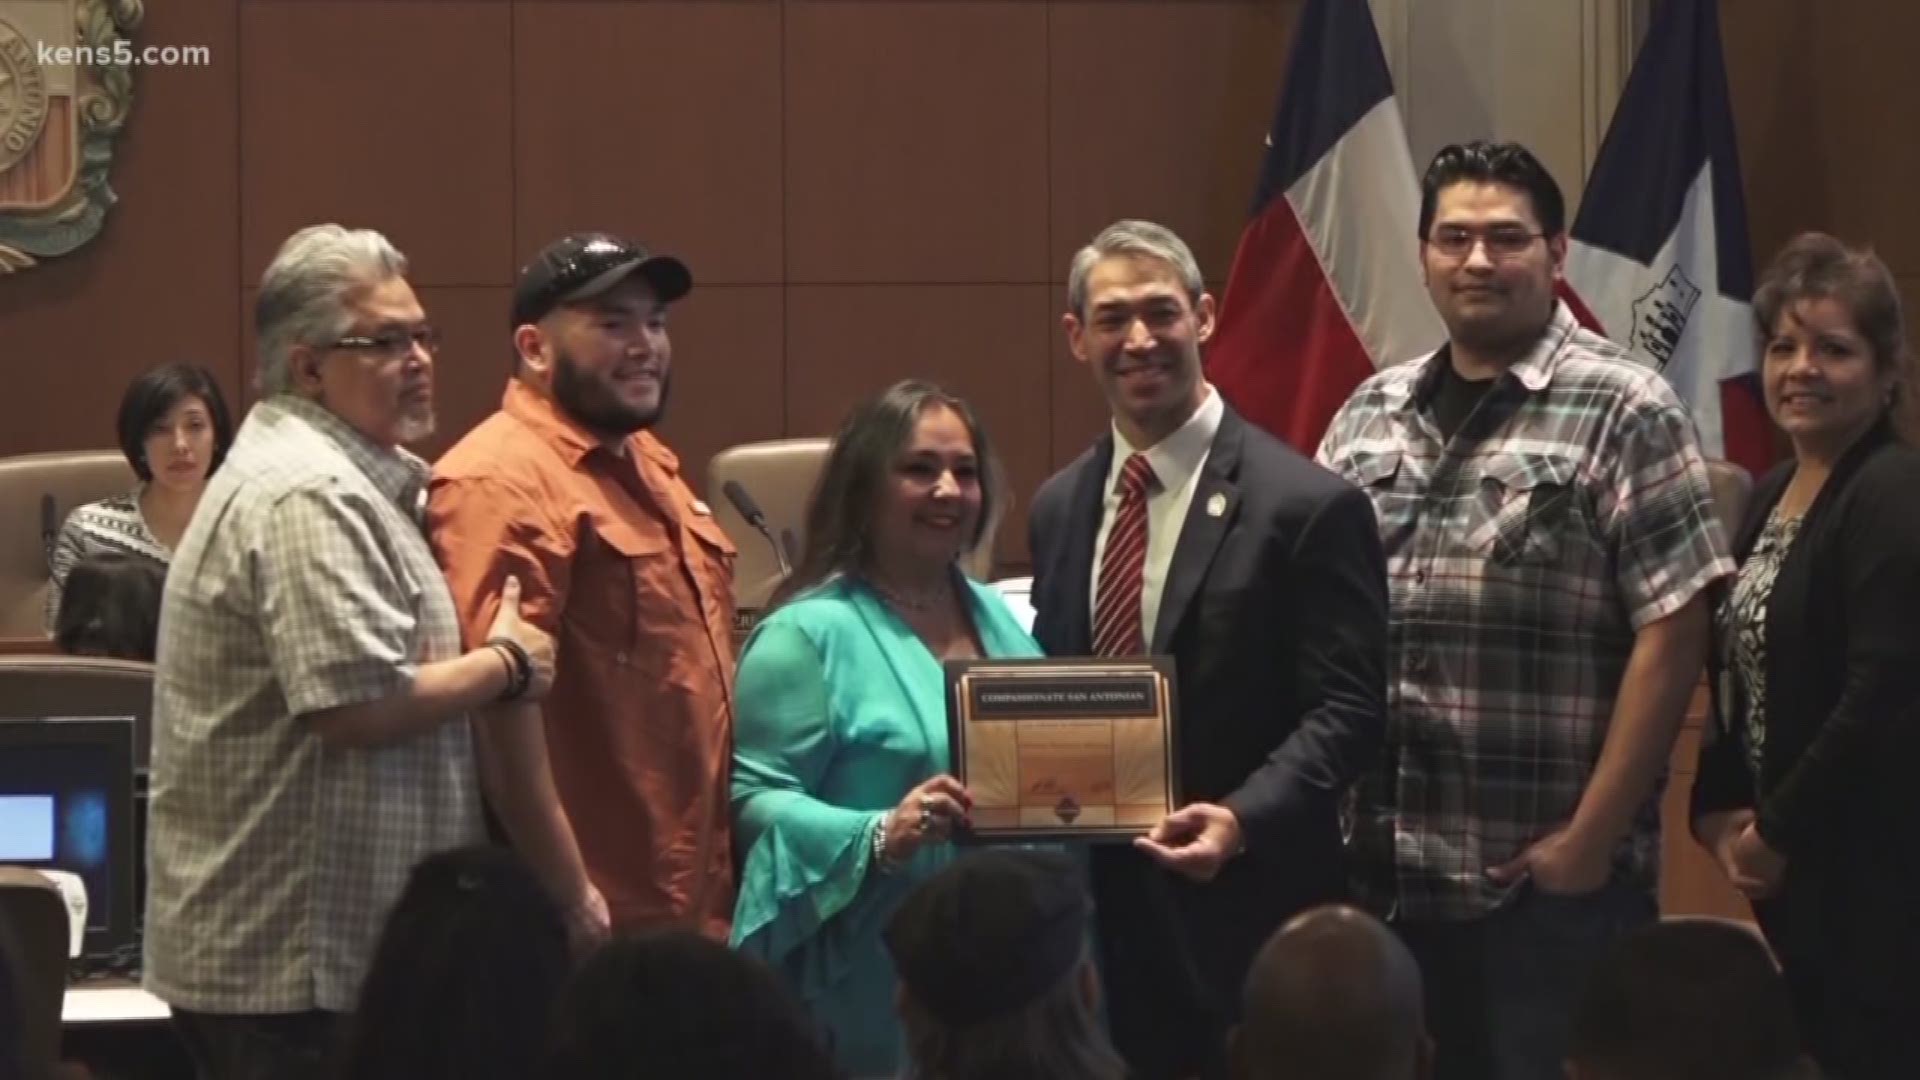 Carmen Medina was honored by Mayor Ron Nirenberg after she jumped into action to save a student attacked by a dog.